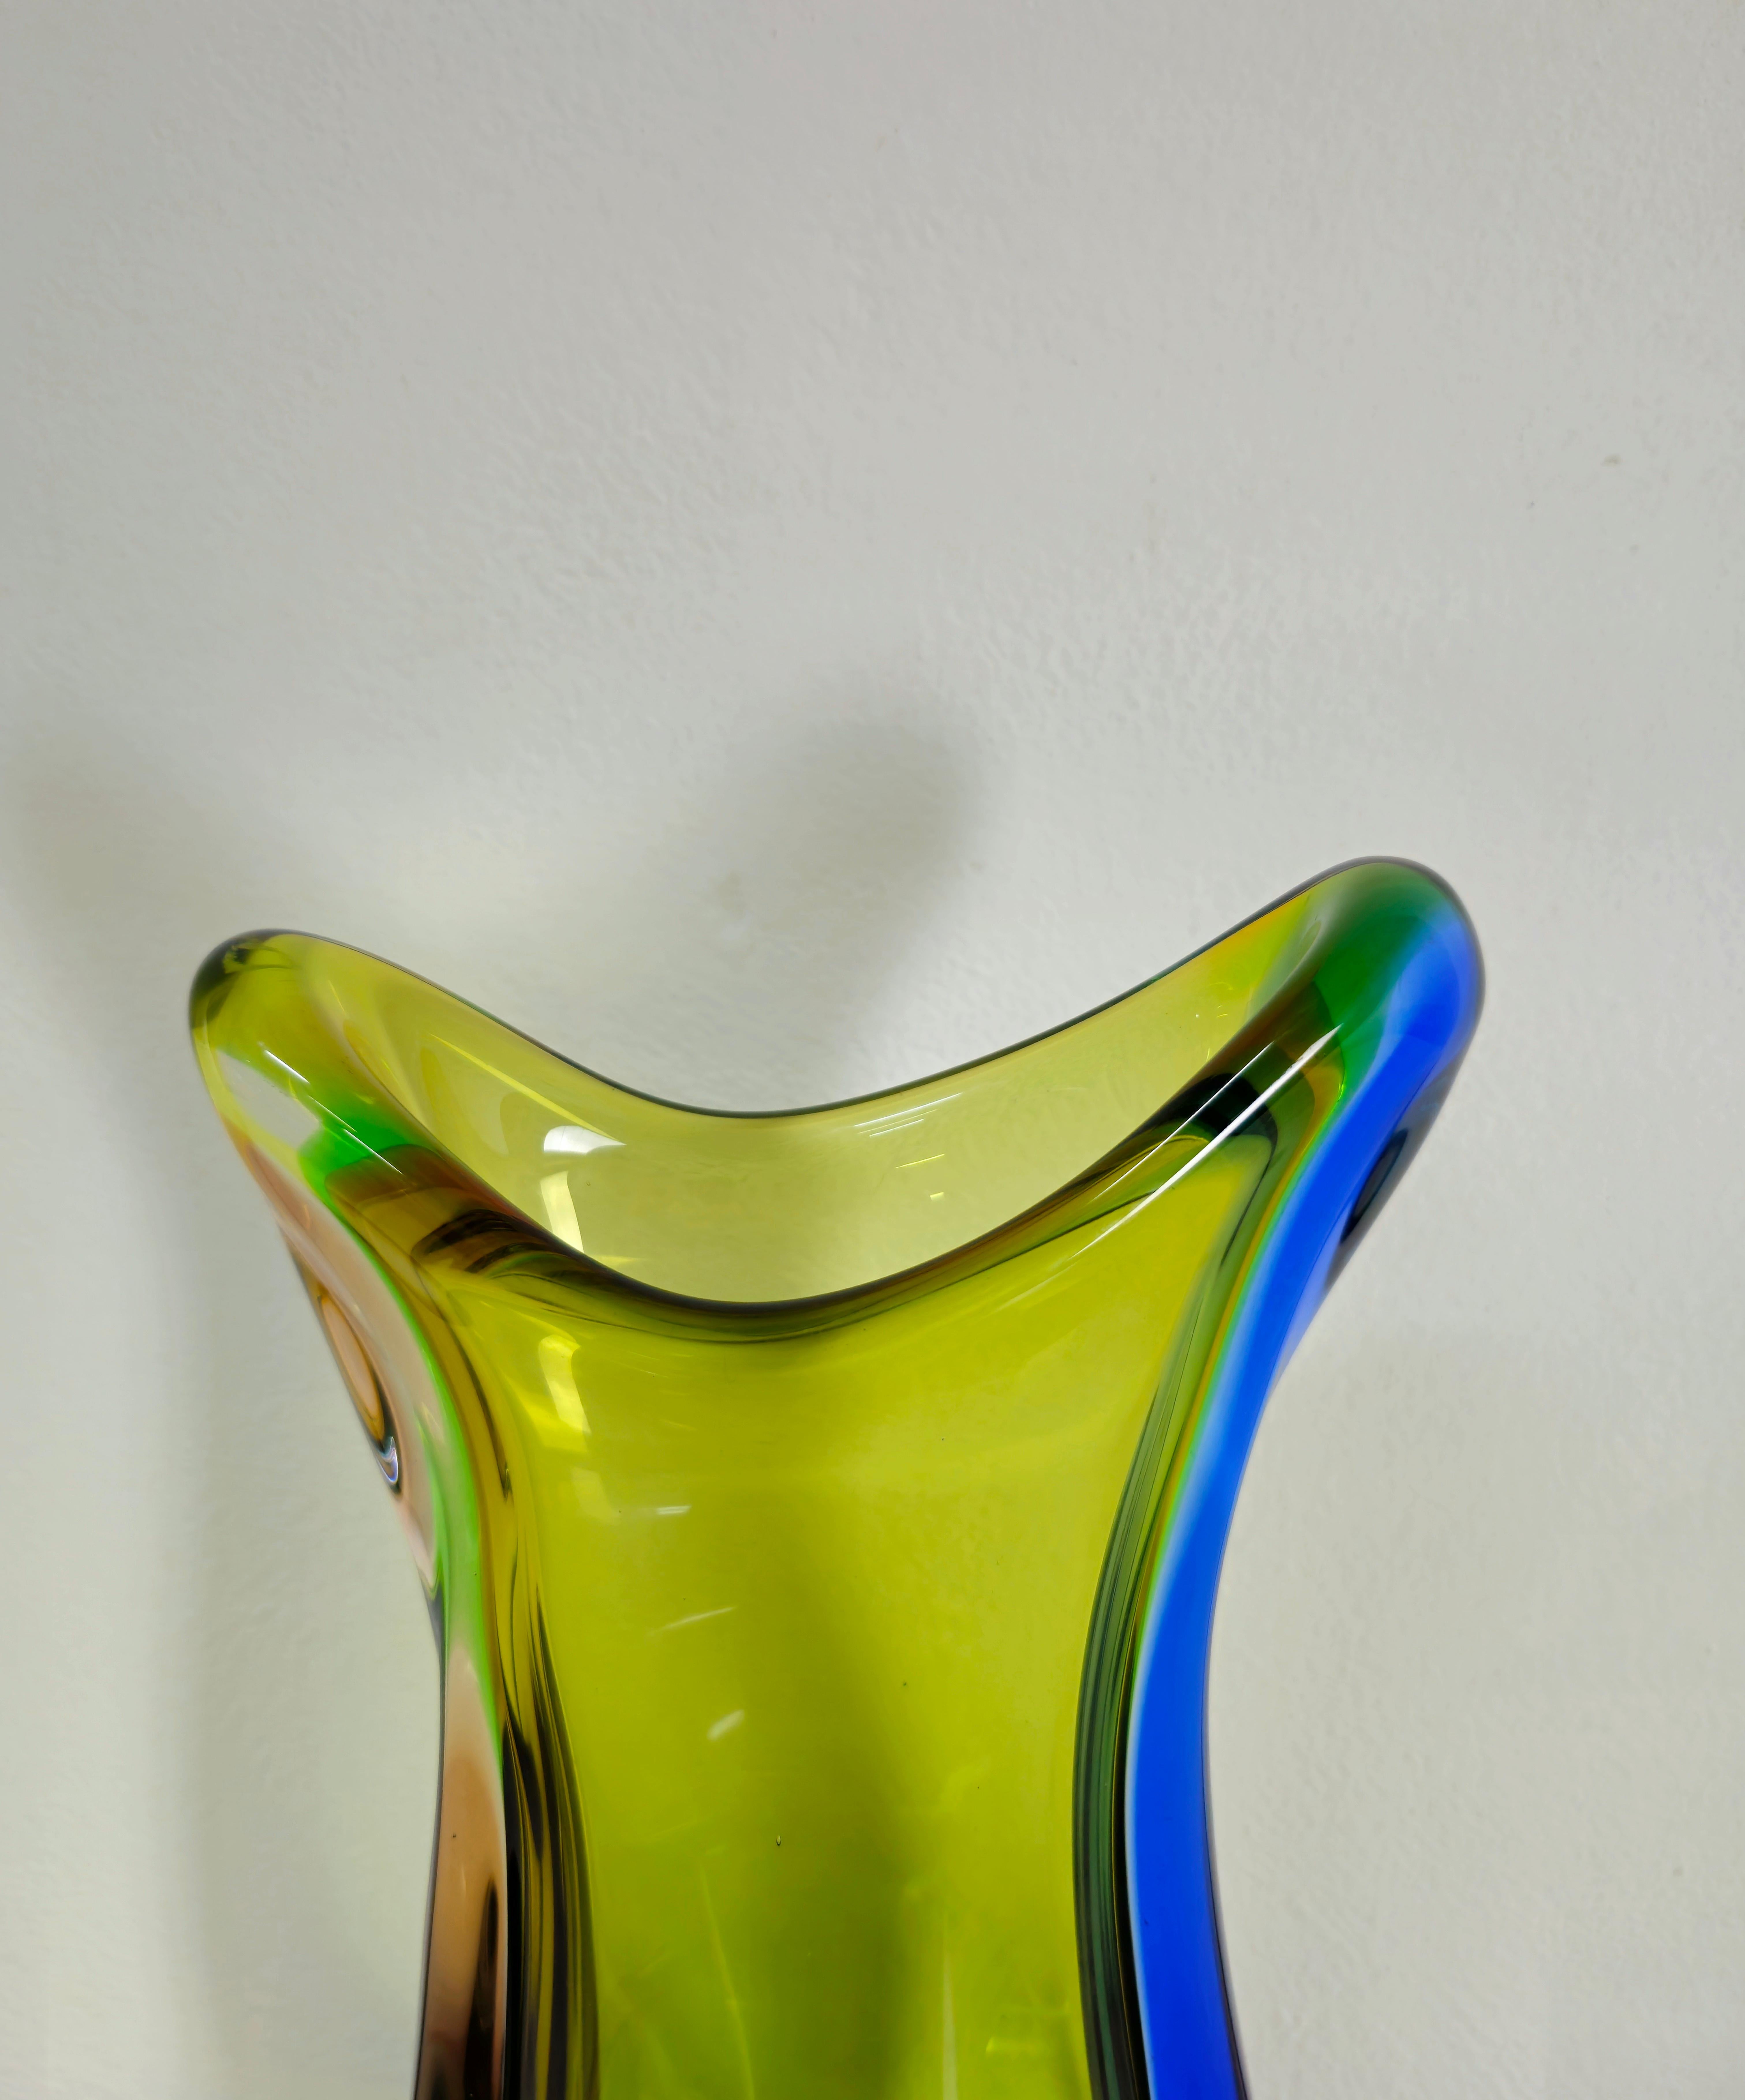 Mid-Century Modern Vase Decorative Object Murano Glass Attributed to Flavio Poli Midcentury 1970s For Sale